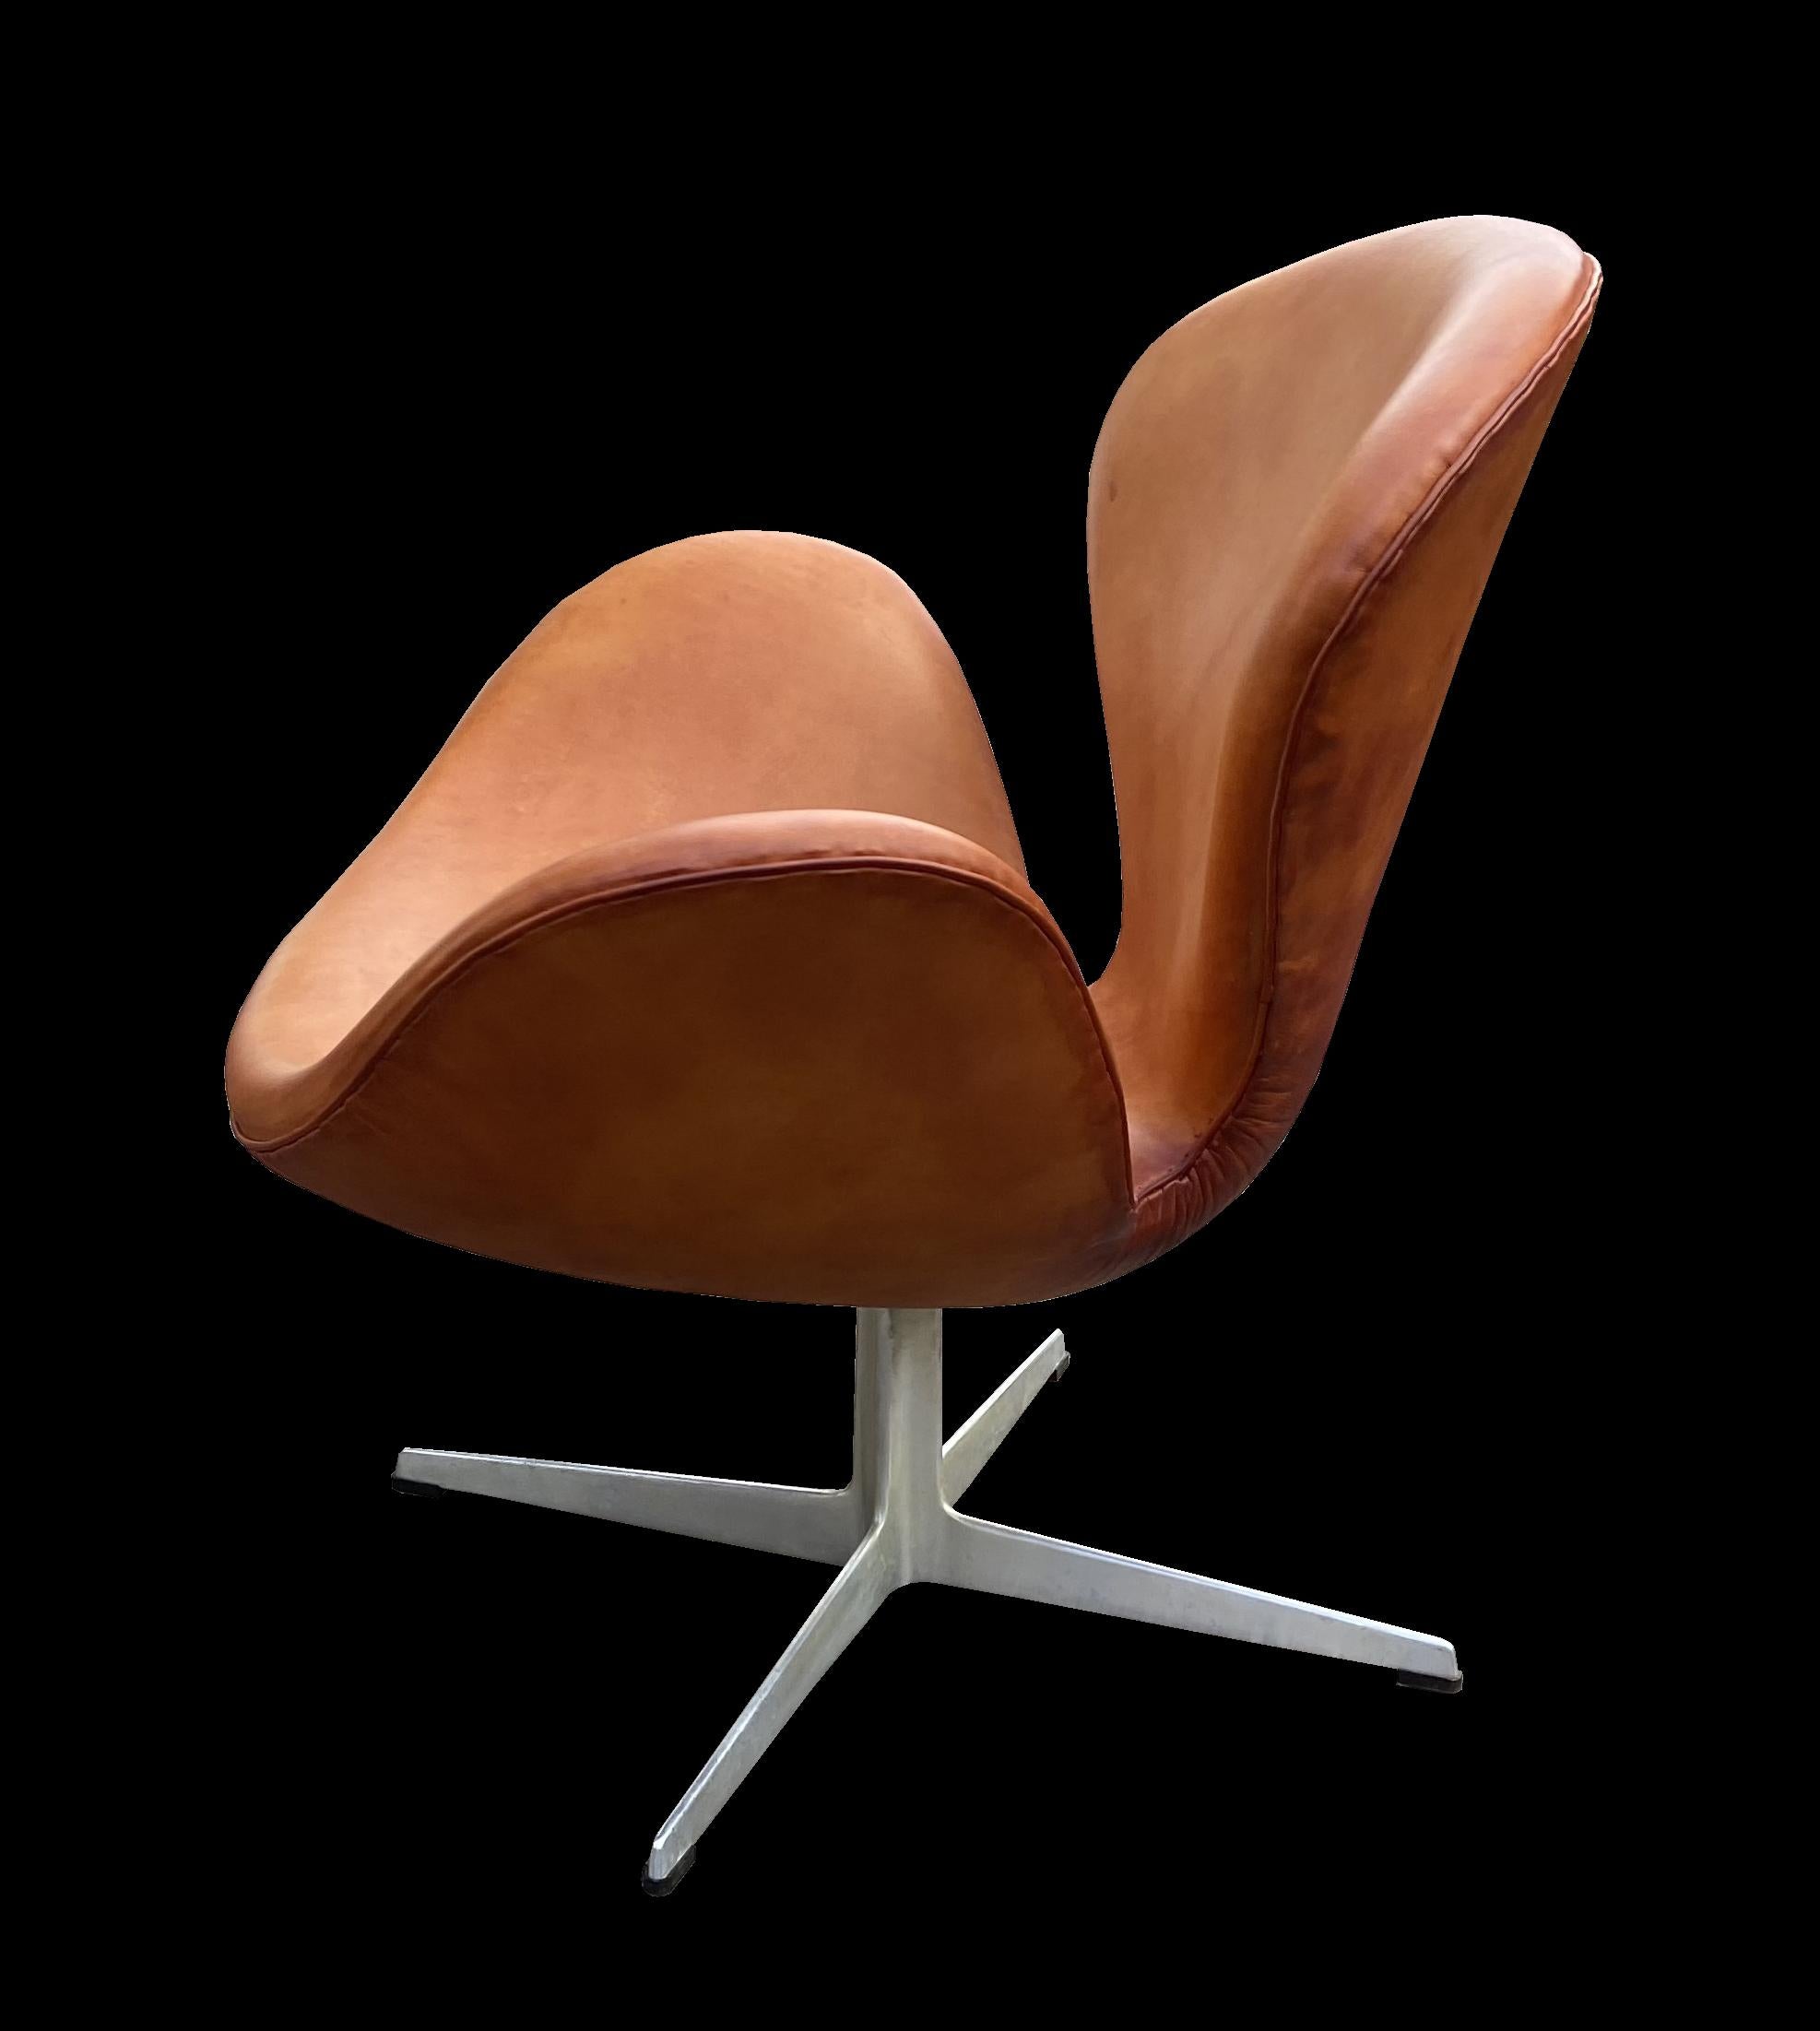 20th Century Tan Leather Swan Chair by Arne Jacobsen for Fritz Hansen